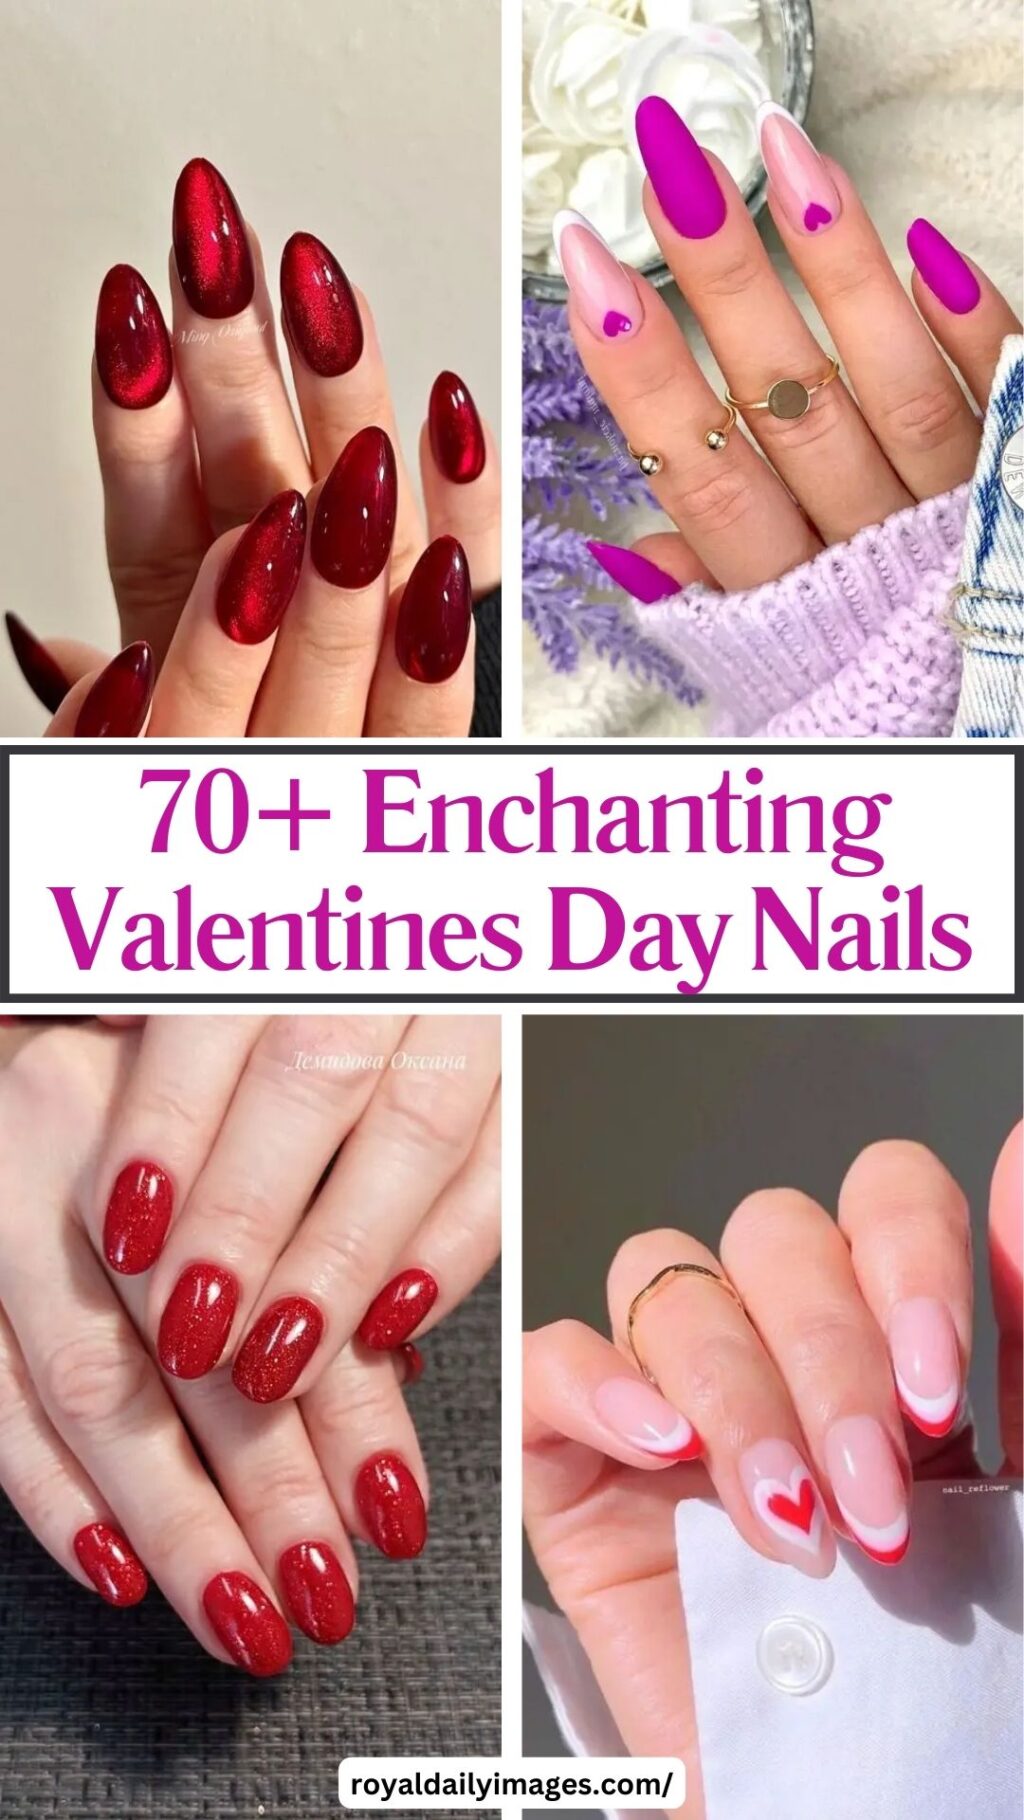 Discover 70+ Enchanting Valentines Day Nails to Fall in Love With